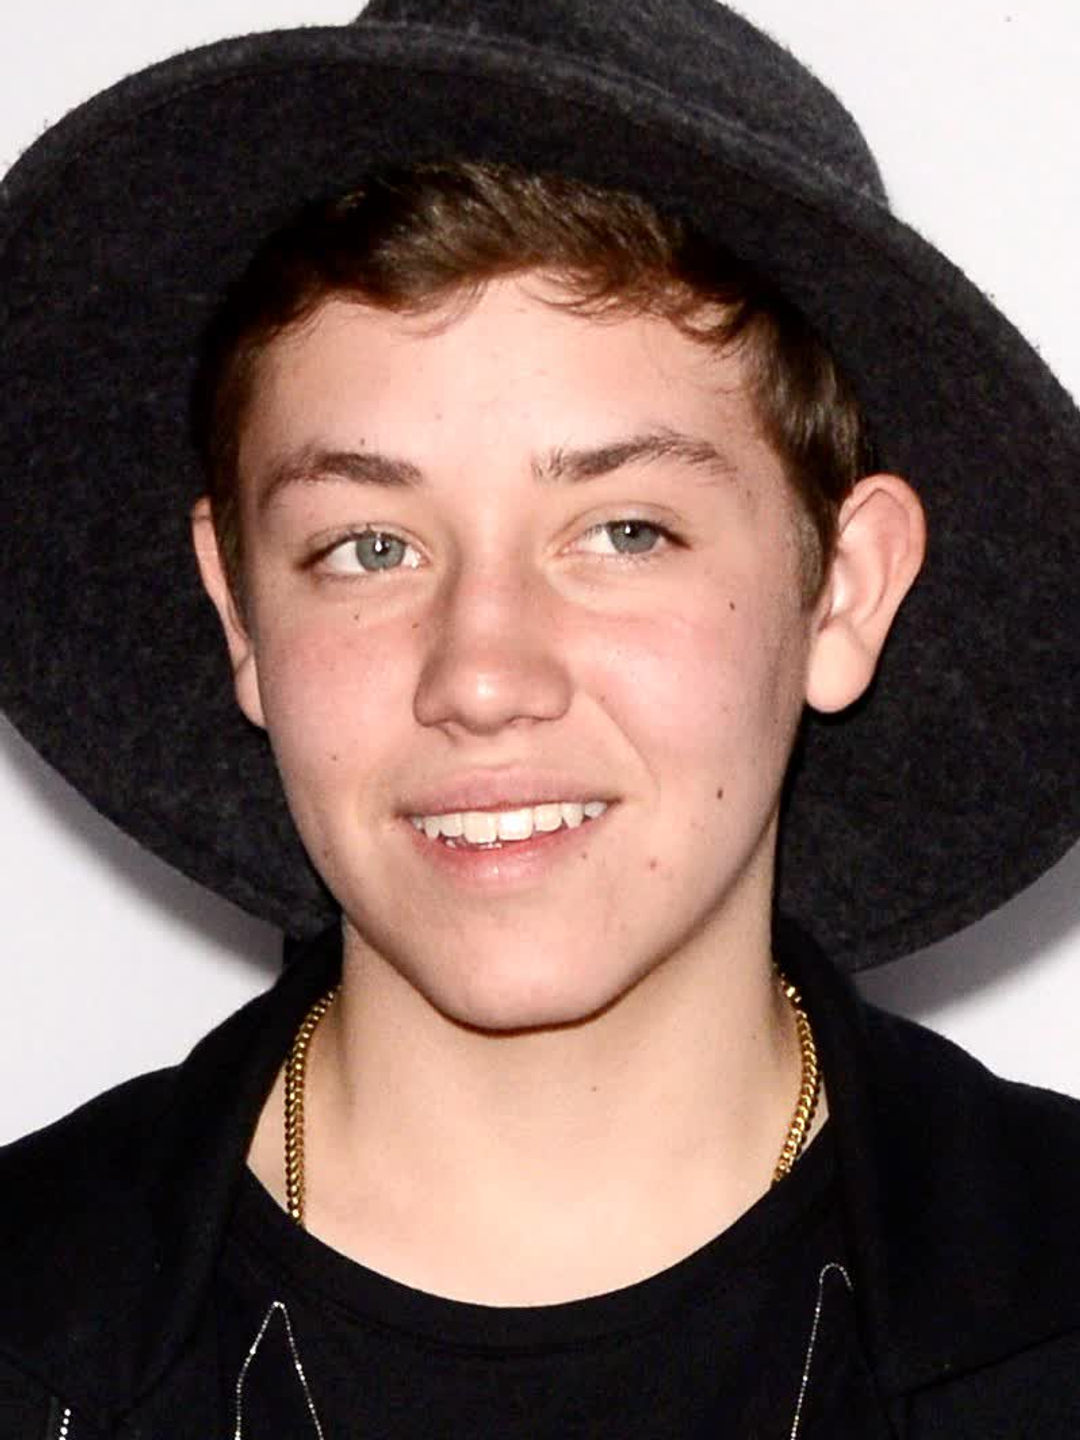 Ethan Cutkosky who are his parents